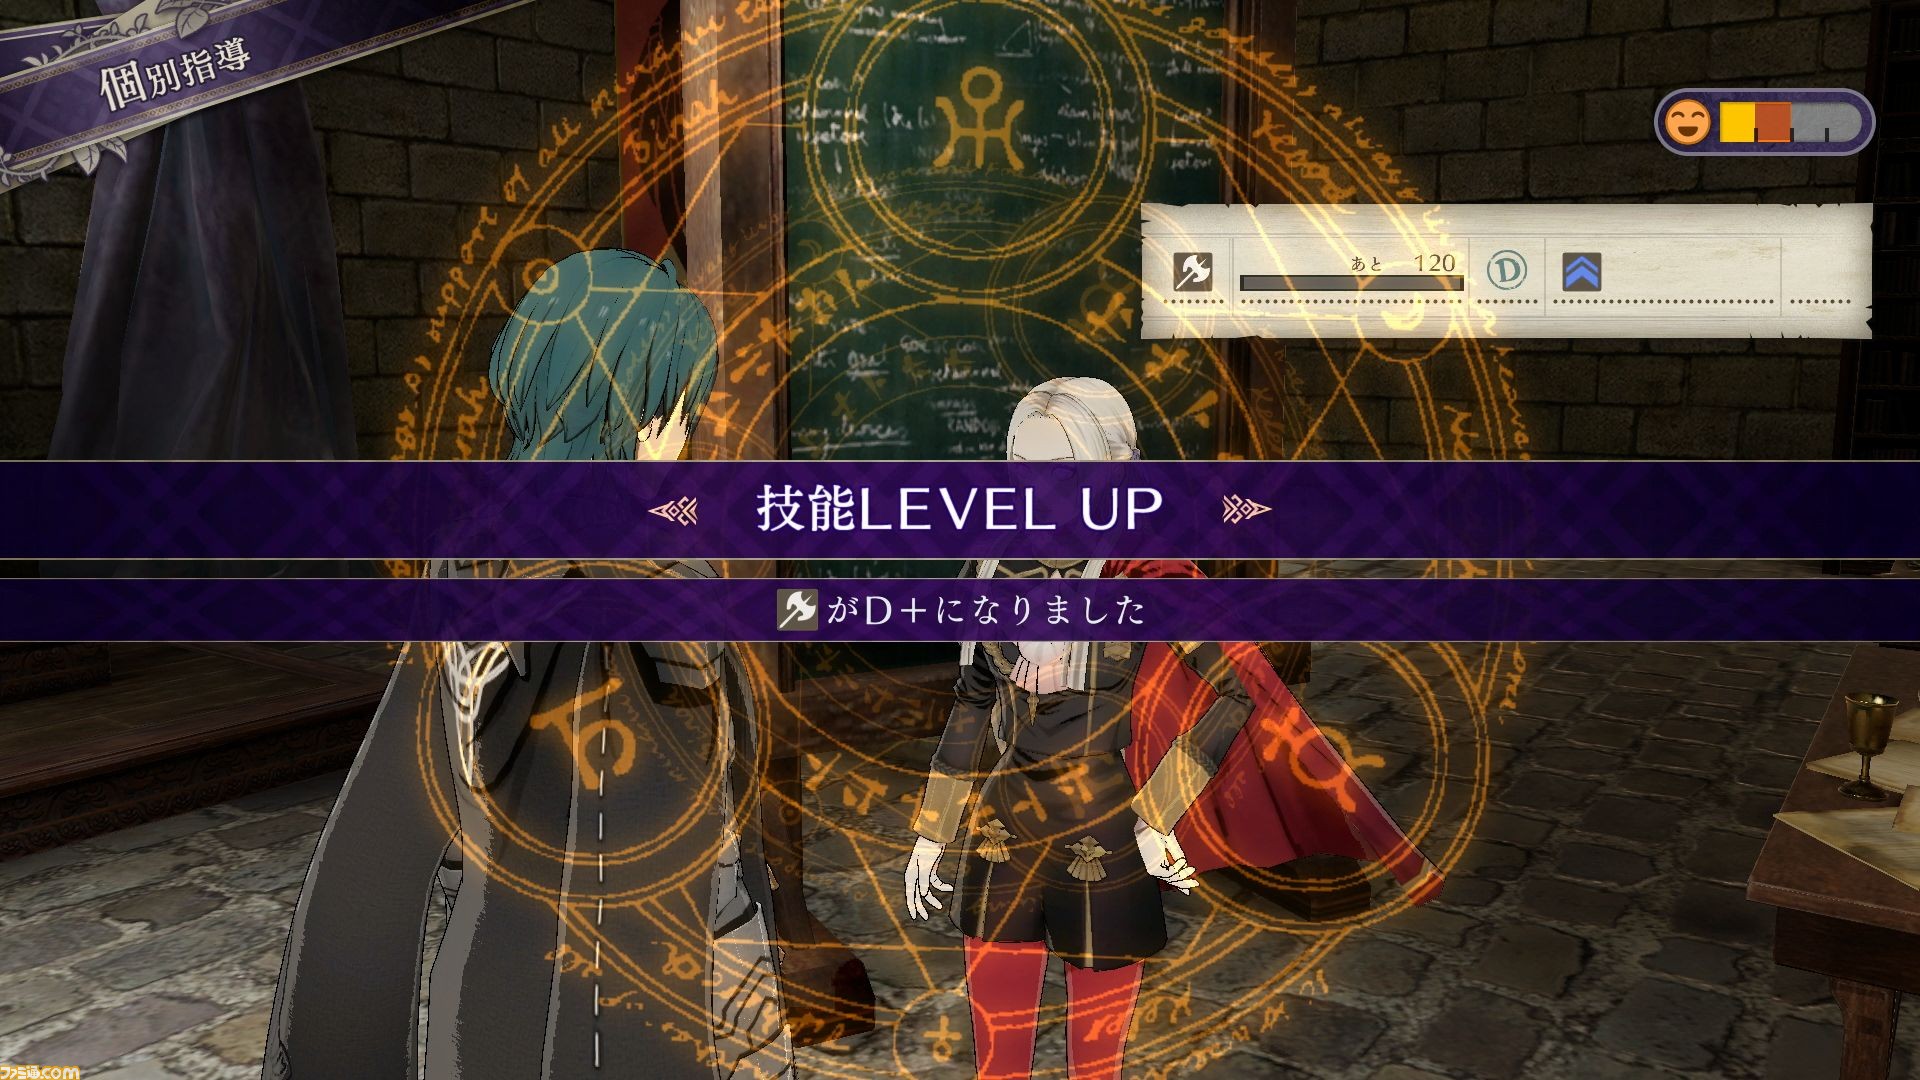 https://www.perfectly-nintendo.com/wp-content/uploads/sites/1/nggallery/fire-emblem-three-houses-25-04-2019-1/73.jpg